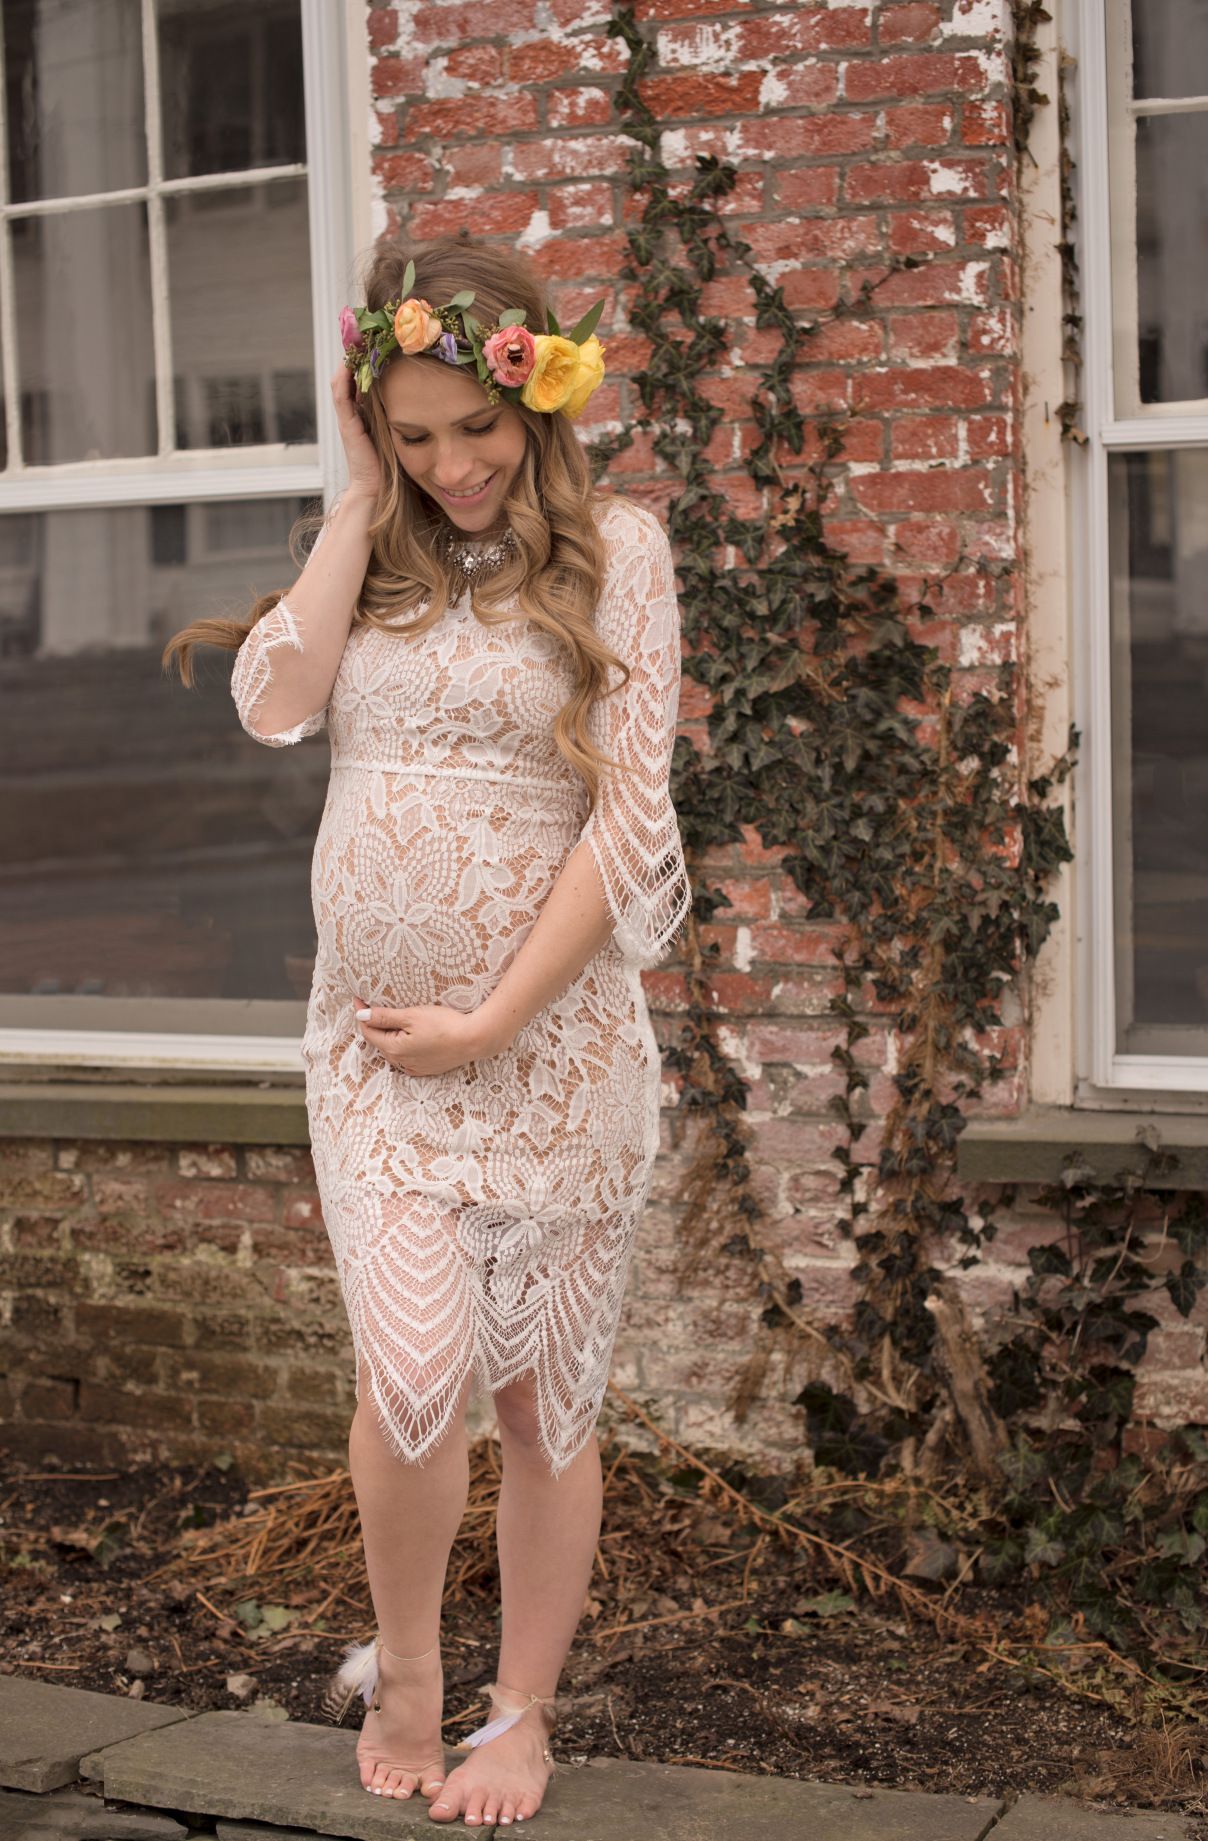 Full Size of Baby Shower:baby Shower Outfits For Dad Baby Shower Outfits For Mom And Dad Baby Shower Outfit For Mom Winter Mom And Dad Shirts For Baby Shower Baby Shower Dresses Cute Inexpensive Maternity Clothes Maternity Evening Gowns Plus Size Maternity Dresses For Baby Shower